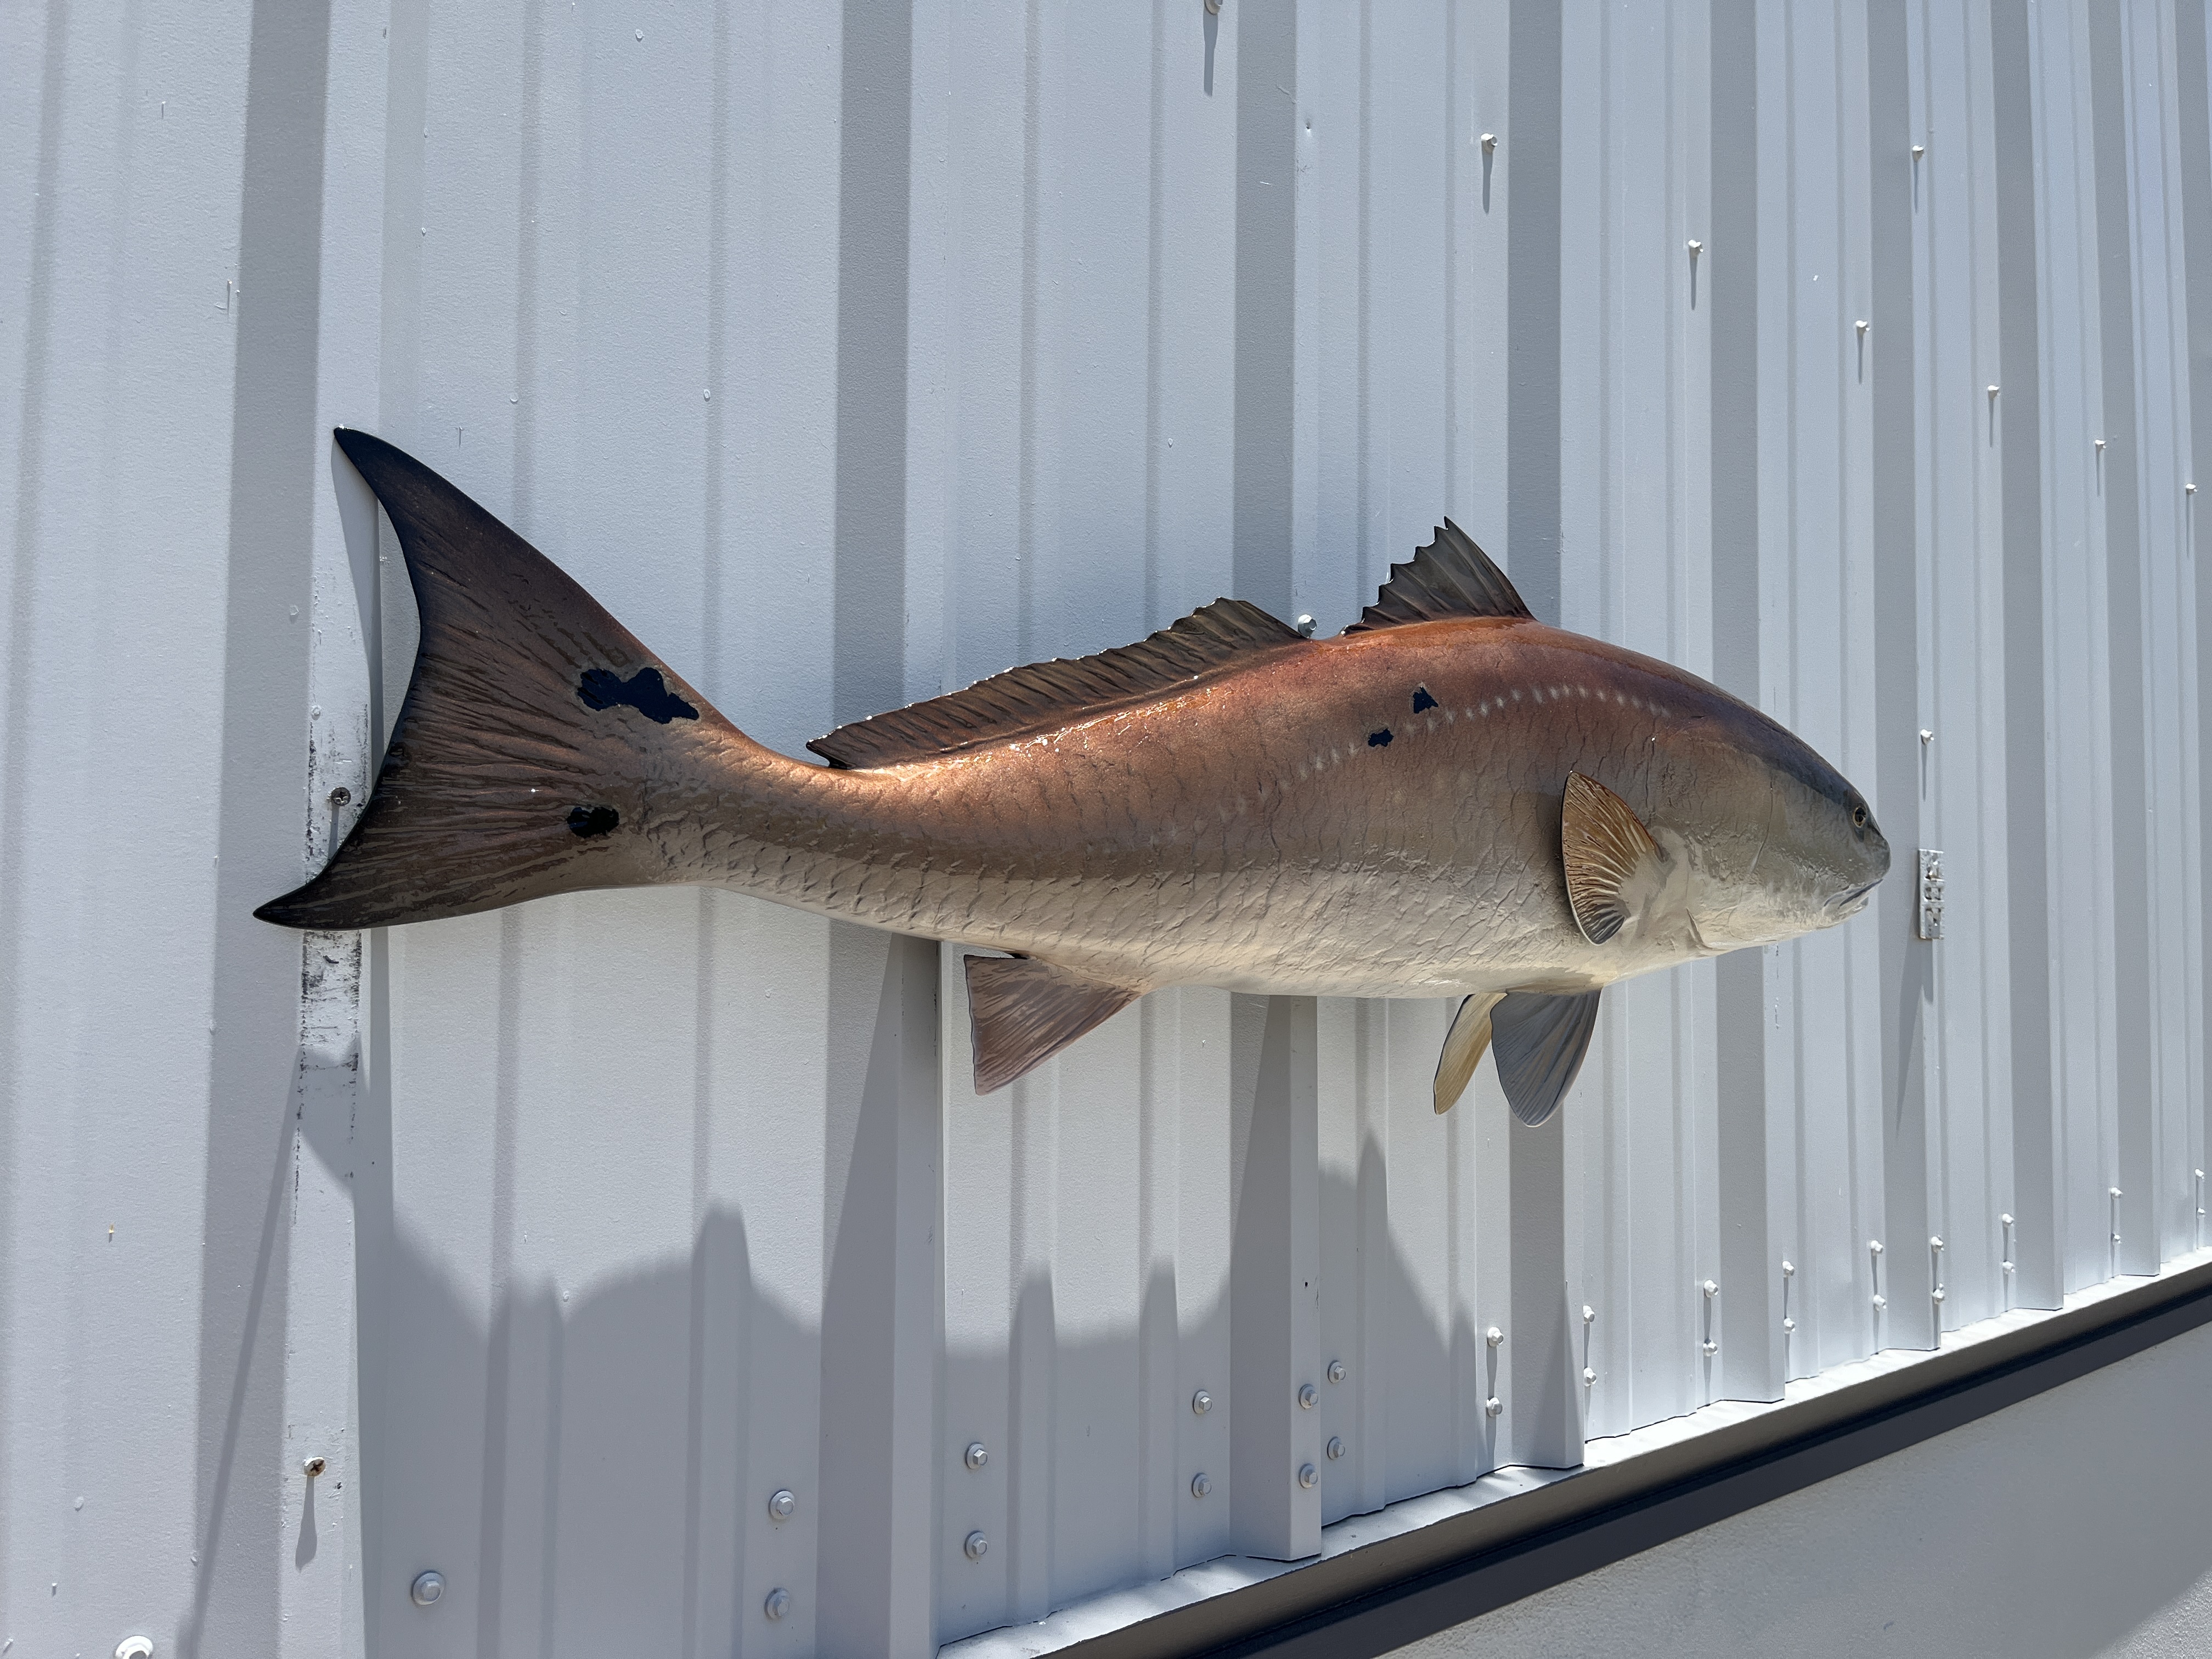 43 inch redfish reproduction proof 22991